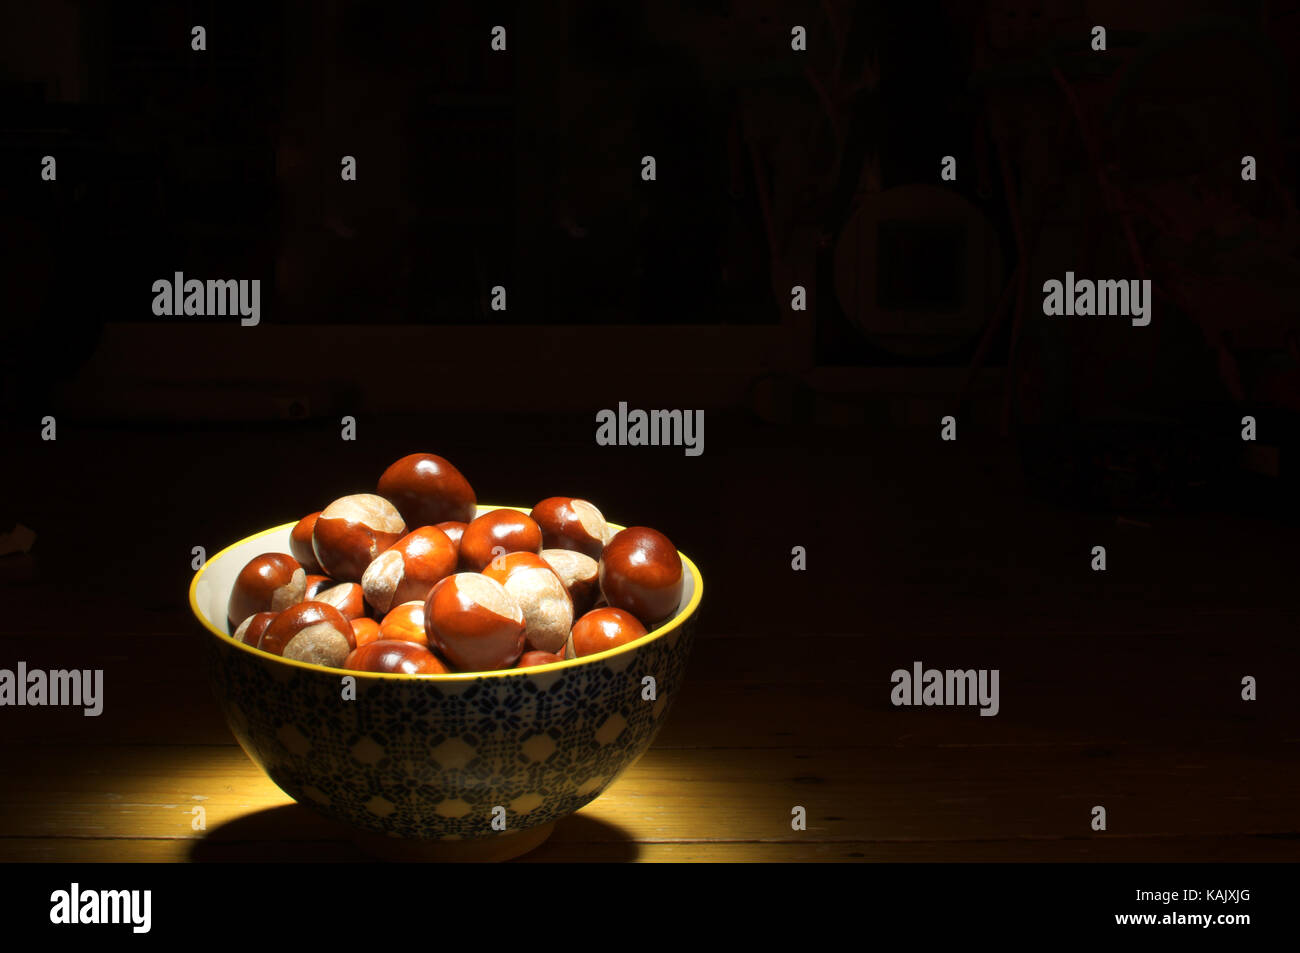 Bowl of conkers with a light shining on them against a black background Stock Photo